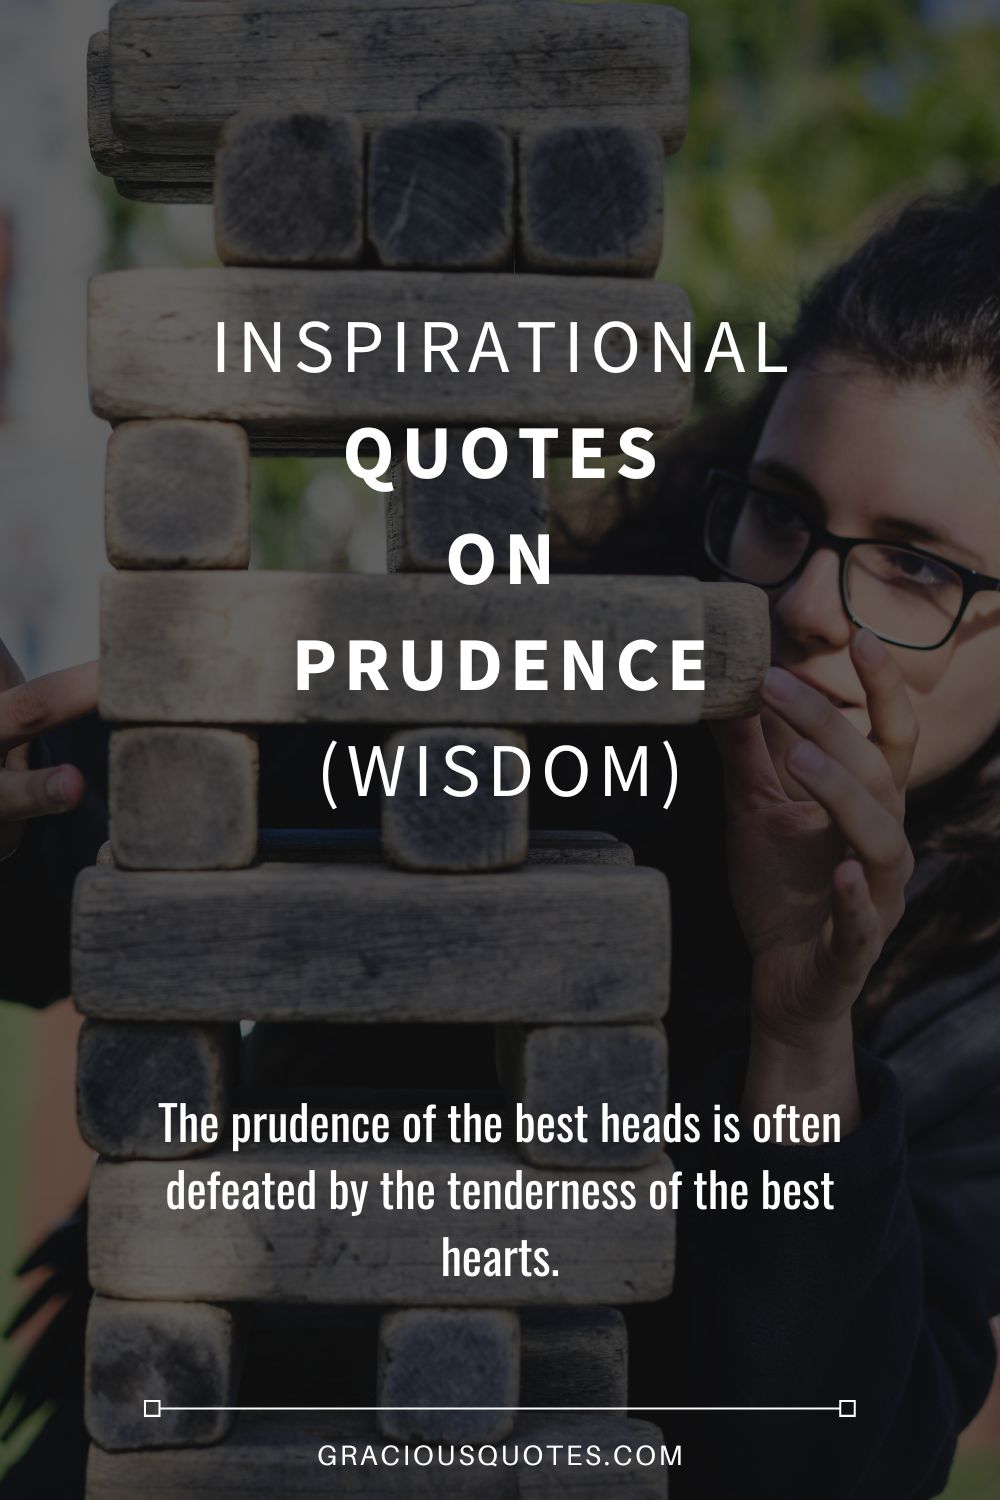 Inspirational Quotes on Prudence (WISDOM) - Gracious Quotes